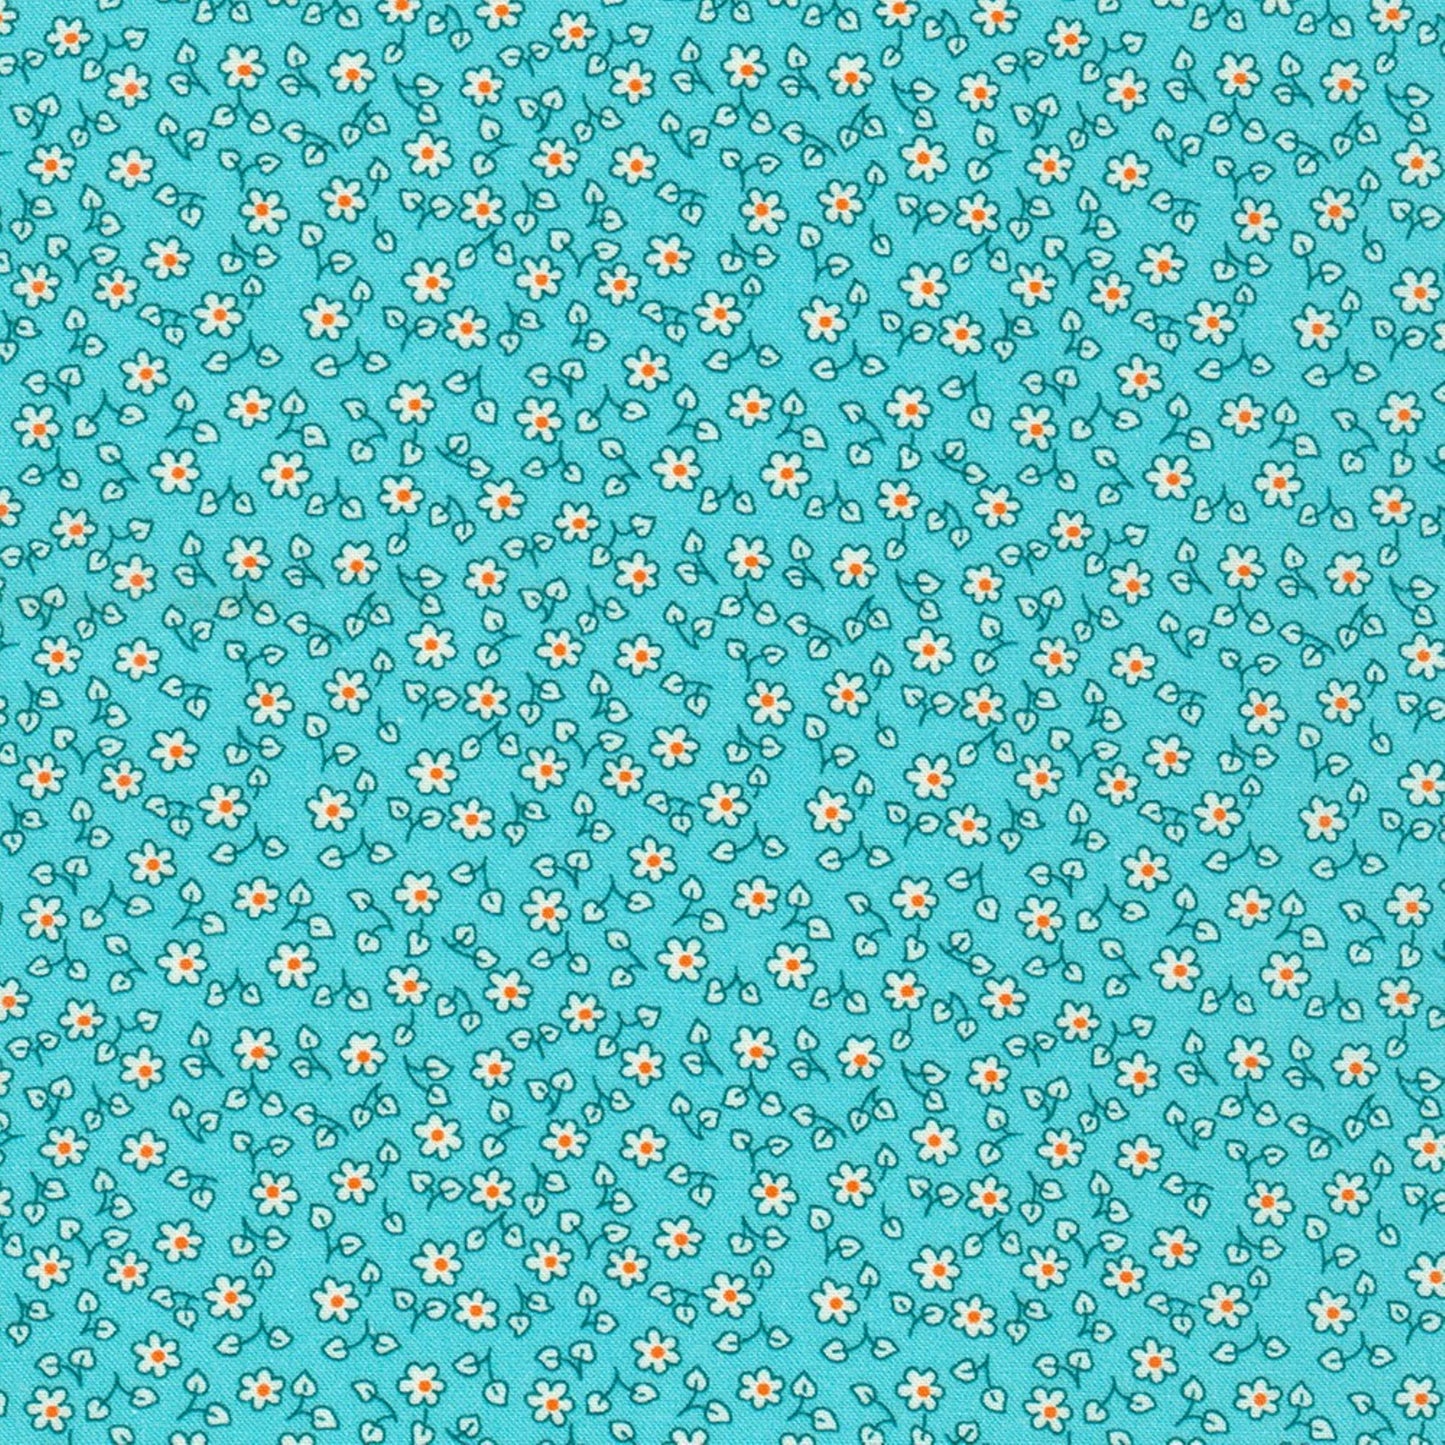 Little Blossoms Debbie Beaves 1930's reproduction bundle - 4 teal yellow Fat Eighths Kaufman cotton quilt fabric